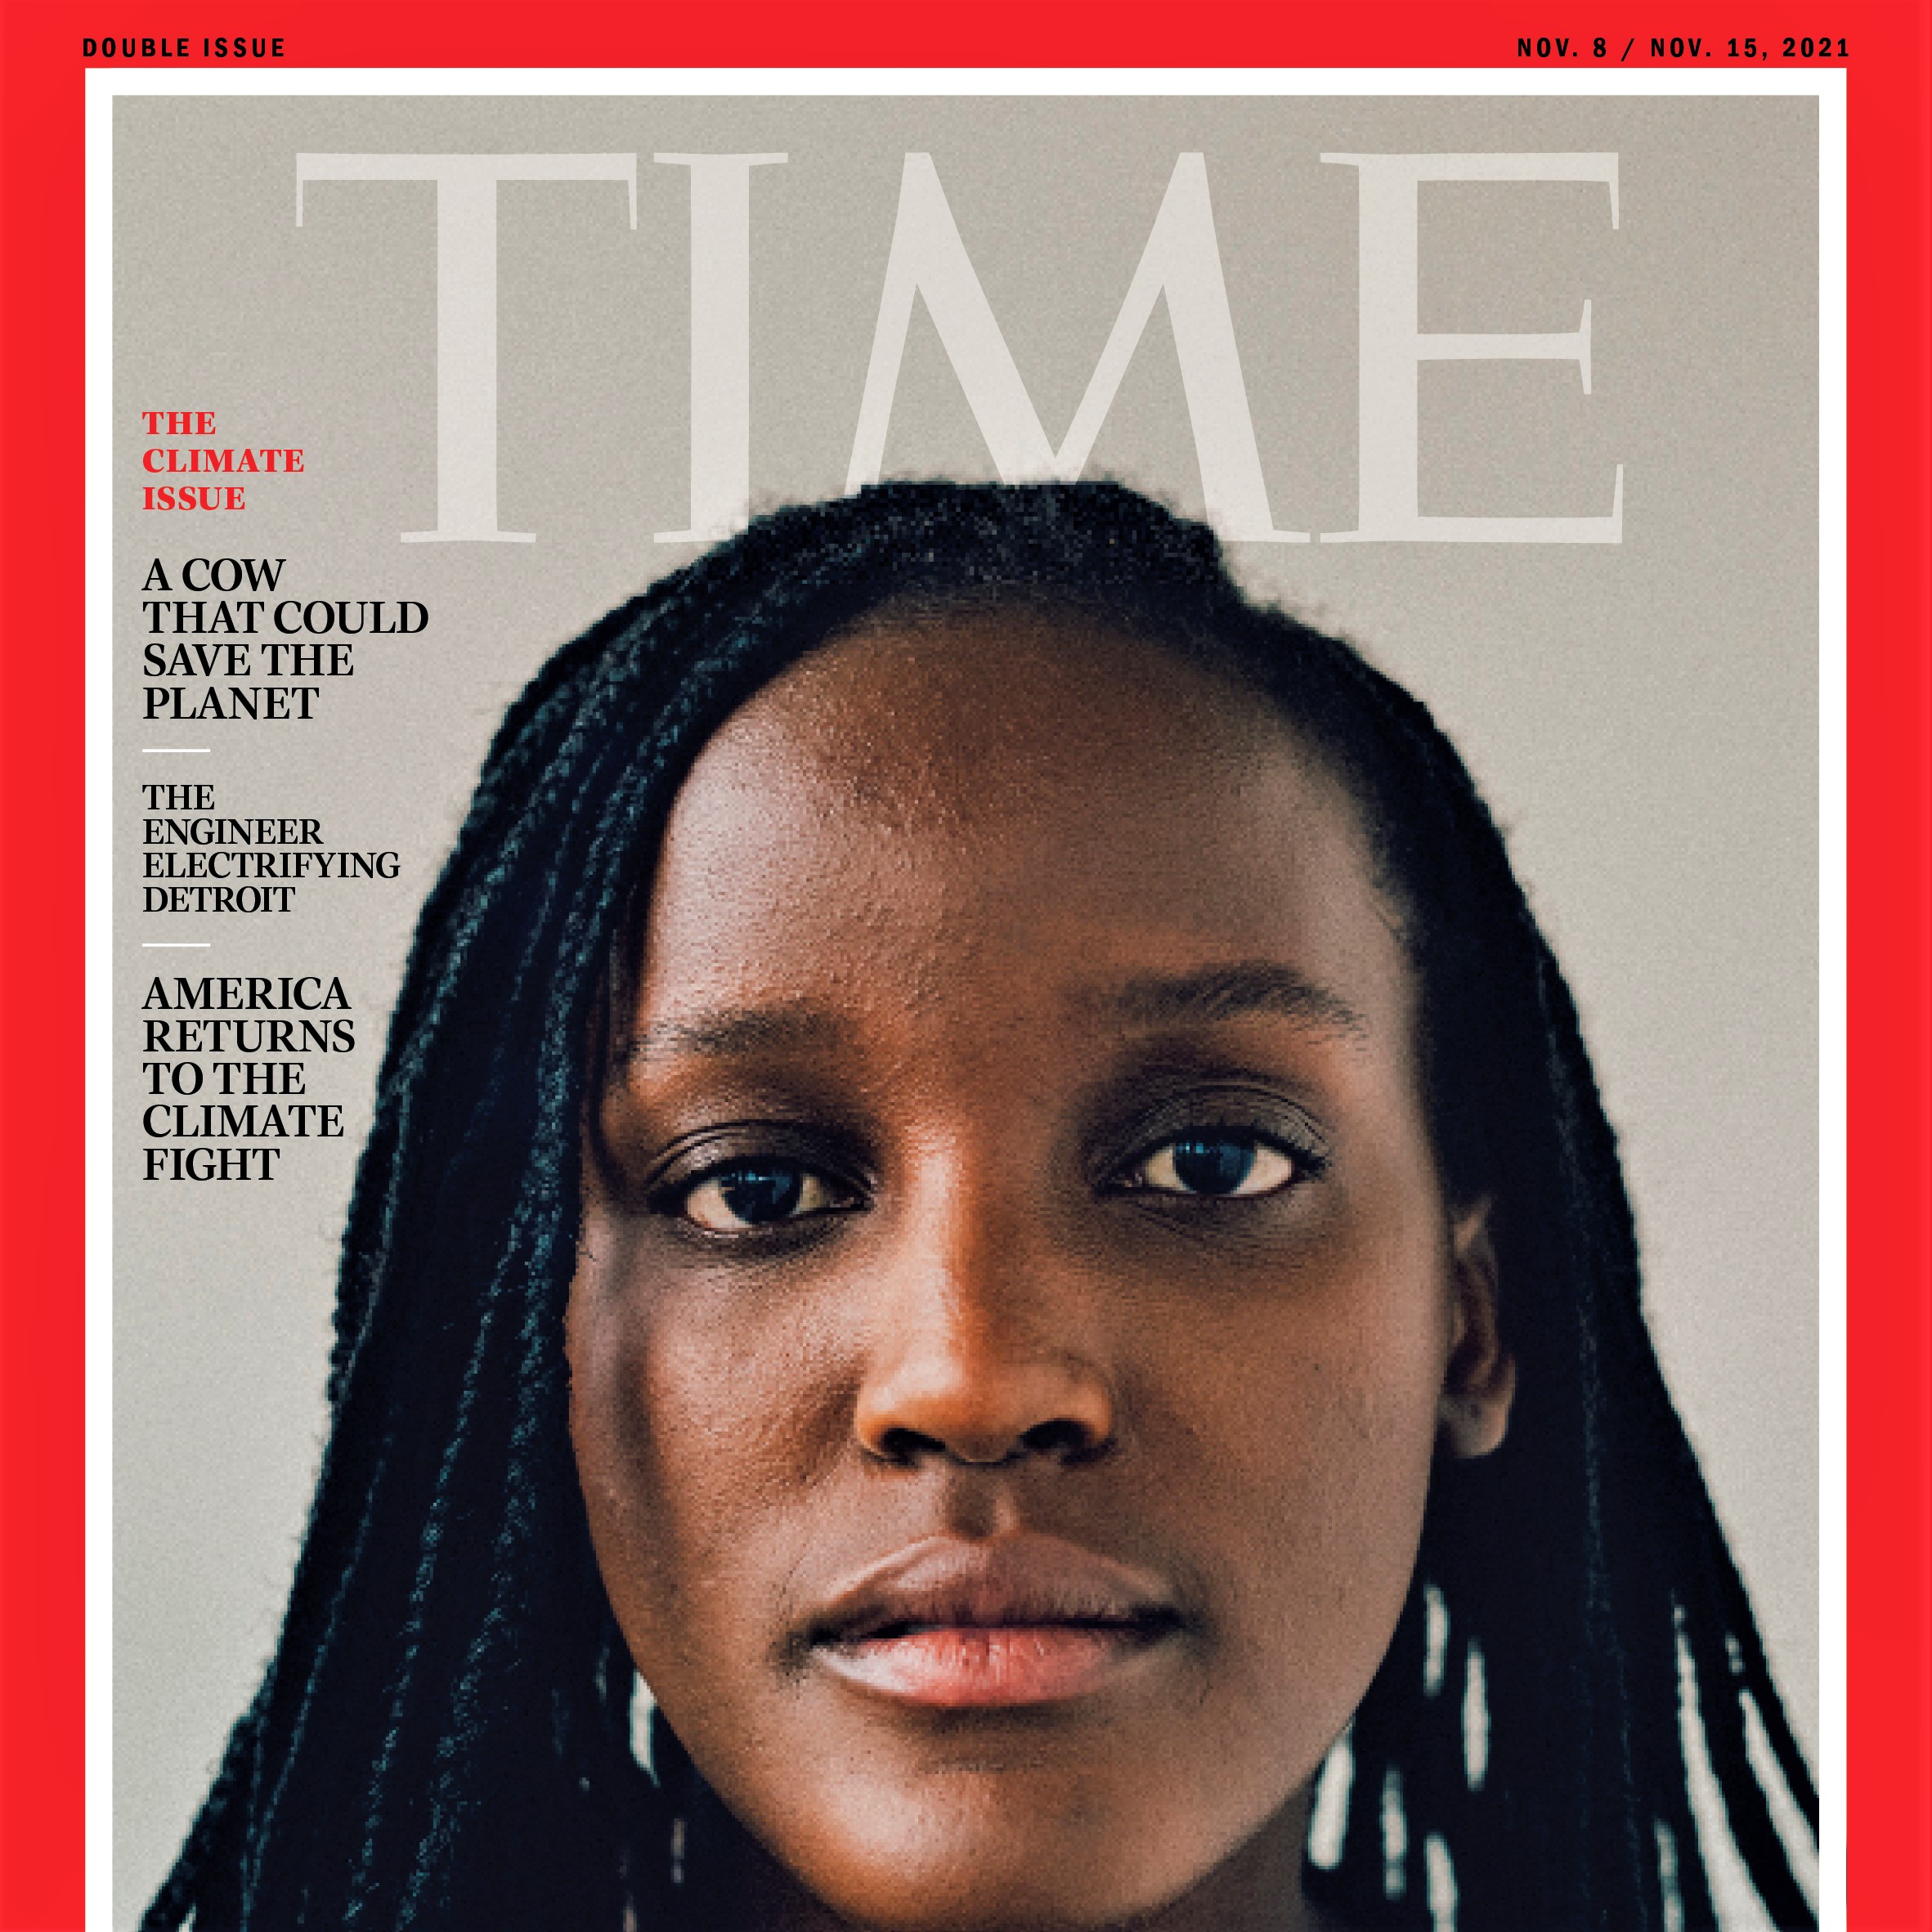 Uganda's Vanessa Nakate is featured on the cover of Time magazine's climate issue (November 8-15, 2021)